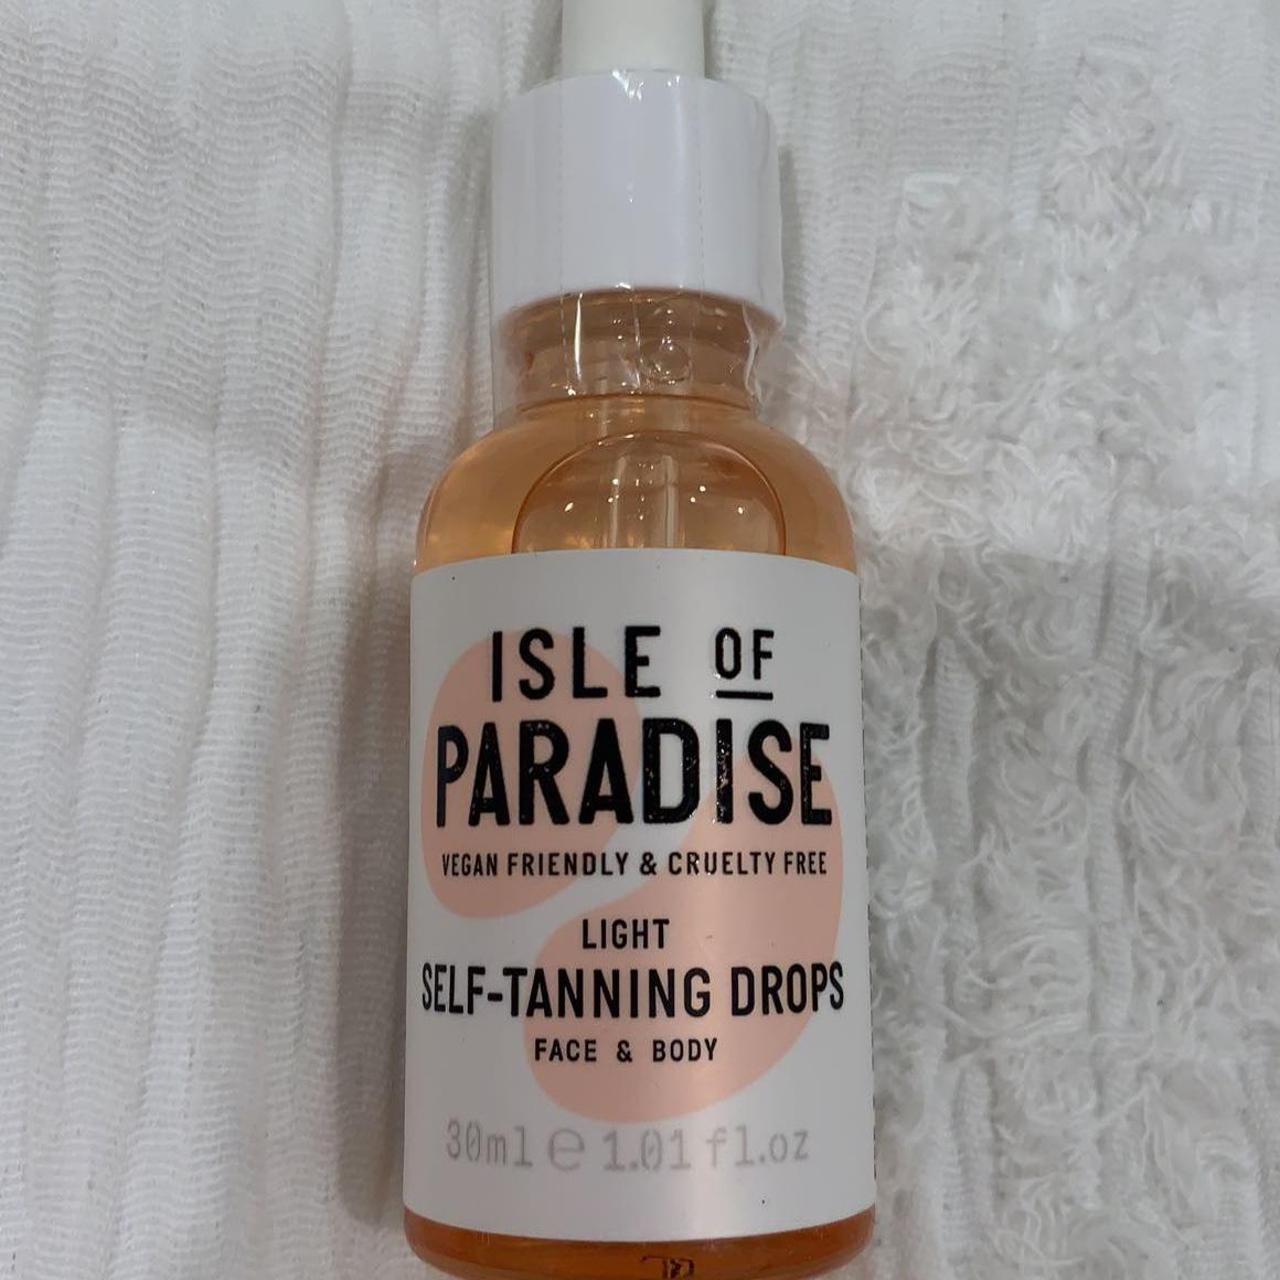 Product Image 3 - ISLE OF PARADISE
SELF TANNING DROPS